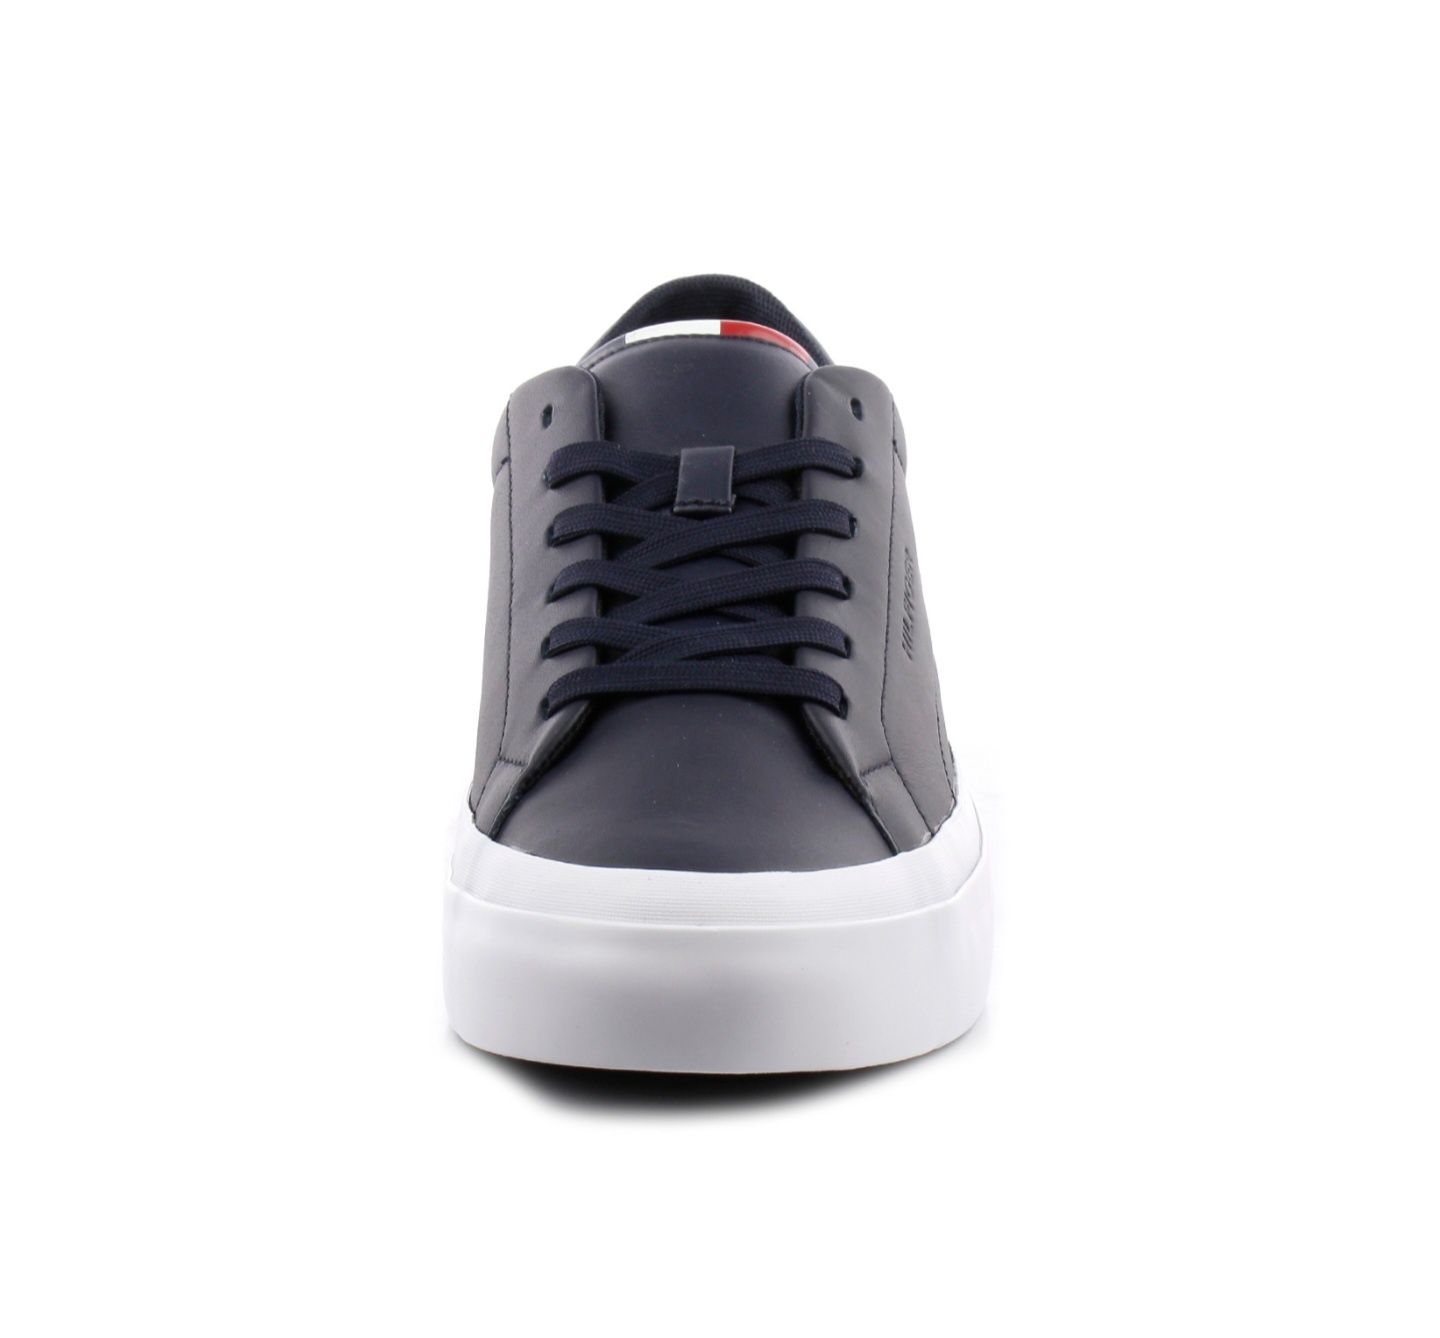 Tommy Hillfiger, sneakers piele 44